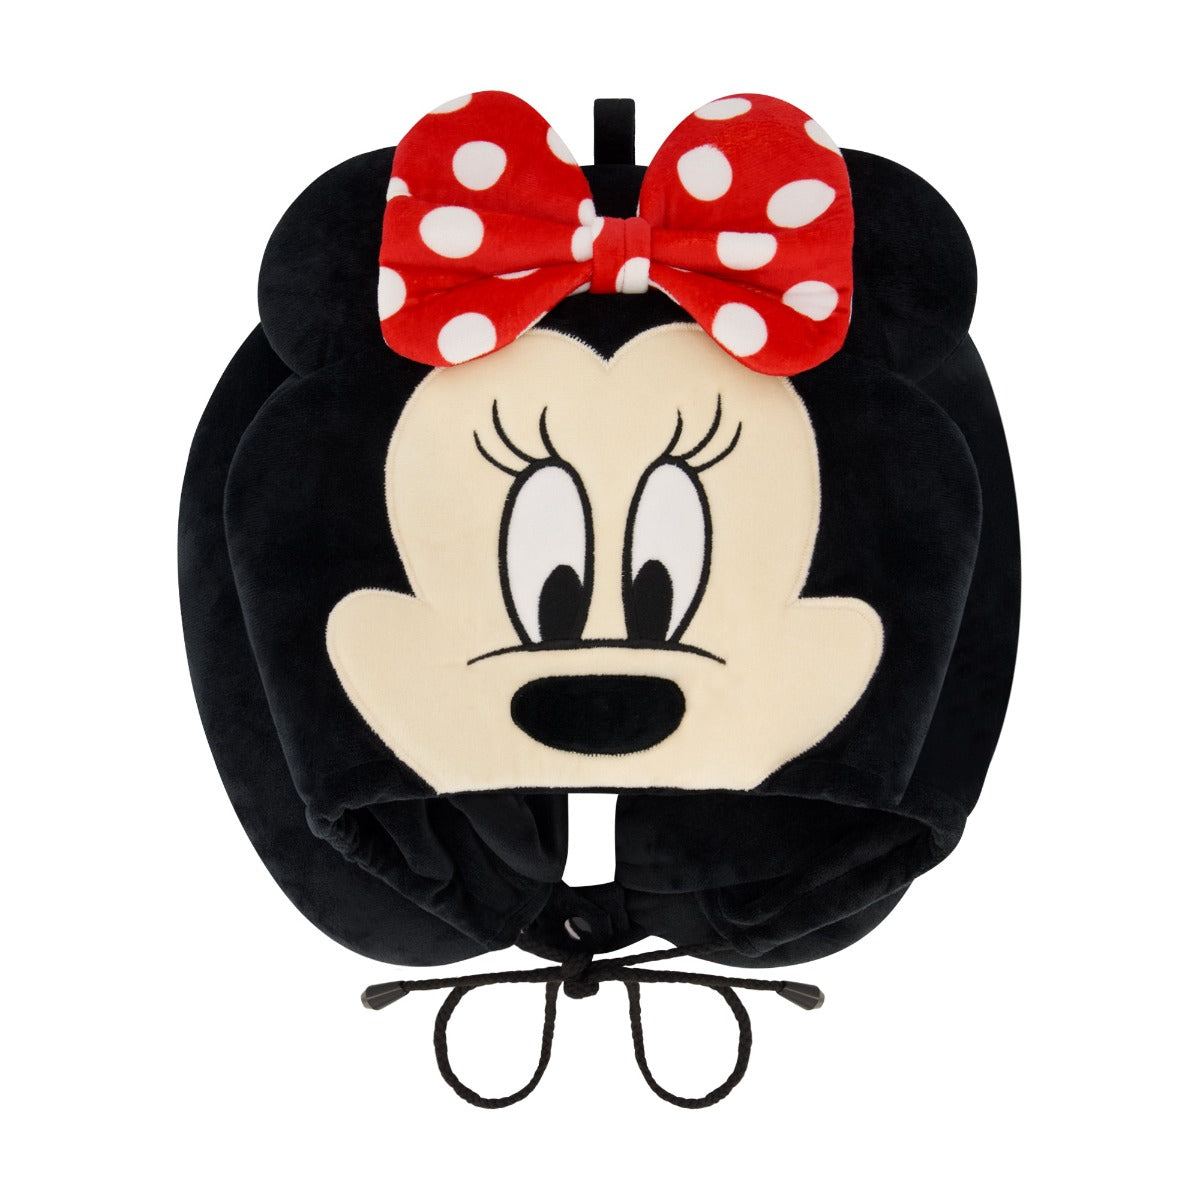 Black Ful Disney Minnie Mouse hooded hoodie travel neck pillow